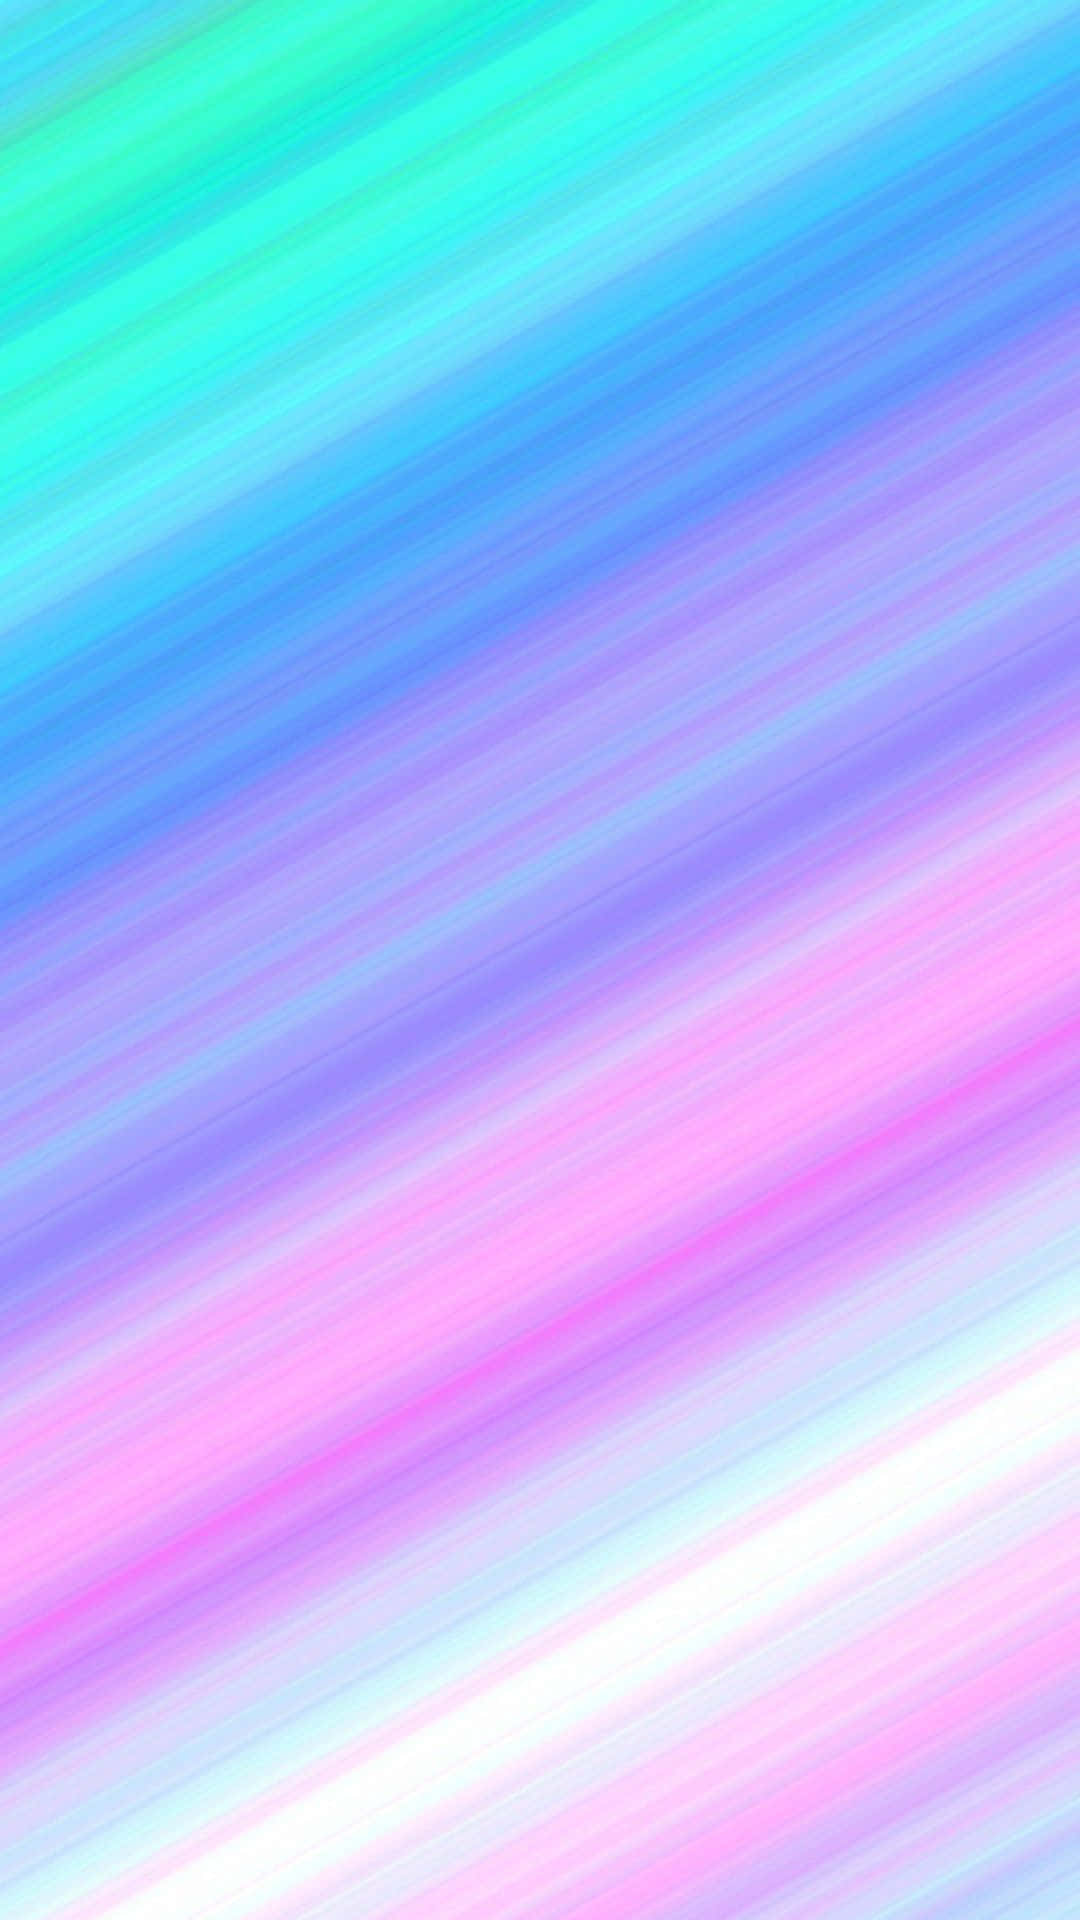 A Blue And Pink Gradient Background With A Rainbow Effect Wallpaper